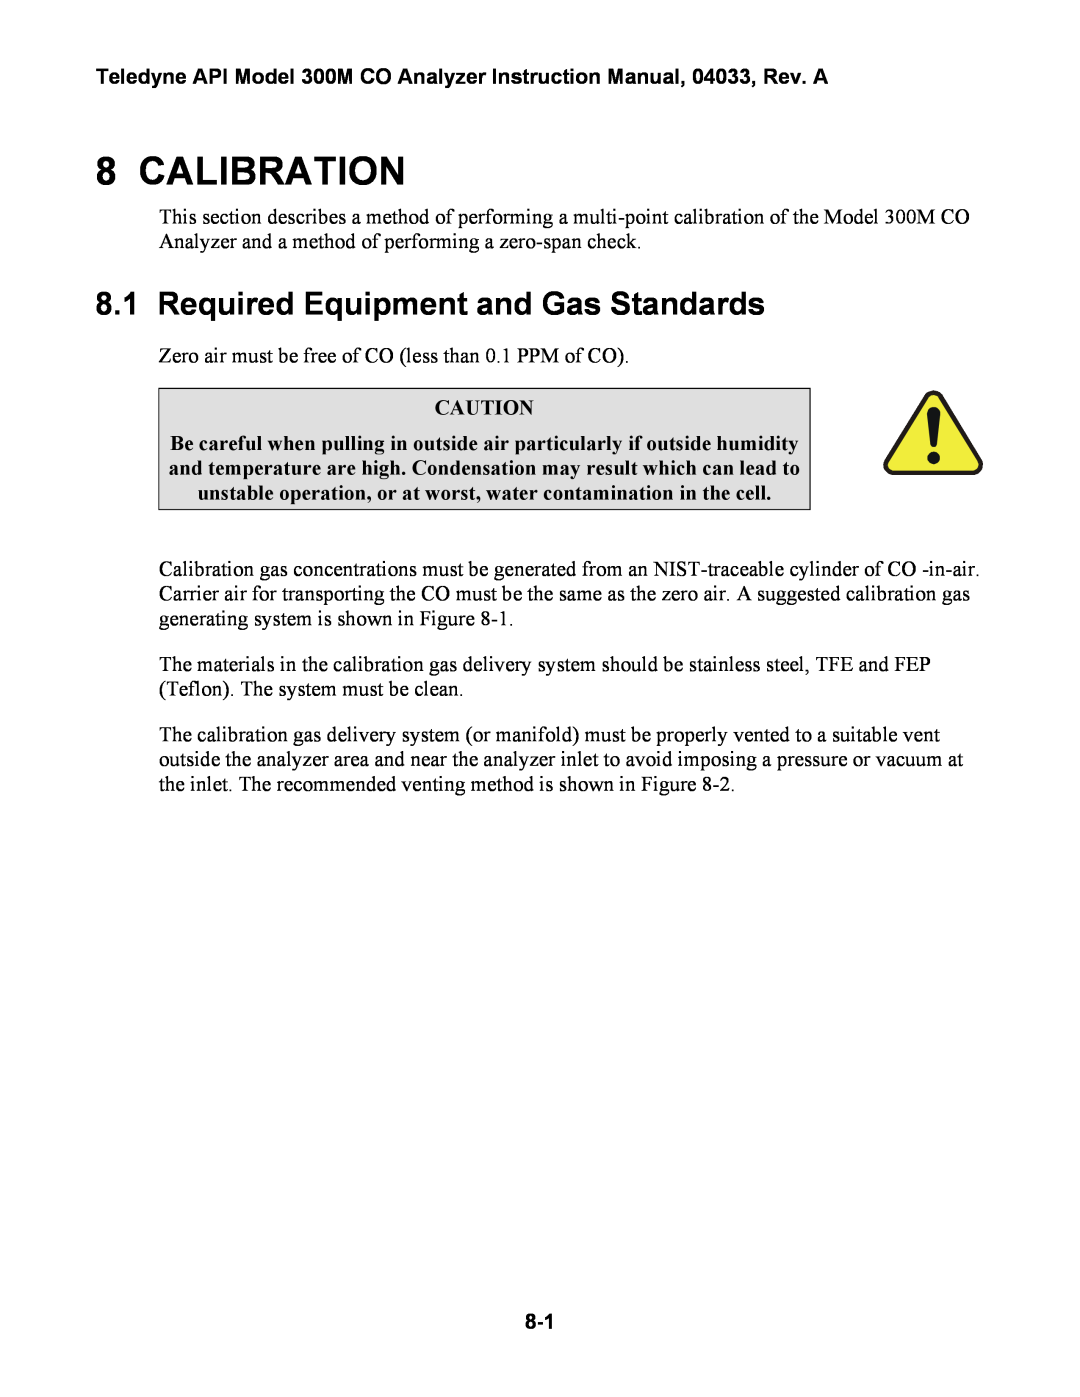 Teledyne 300M instruction manual Calibration, Required Equipment and Gas Standards 